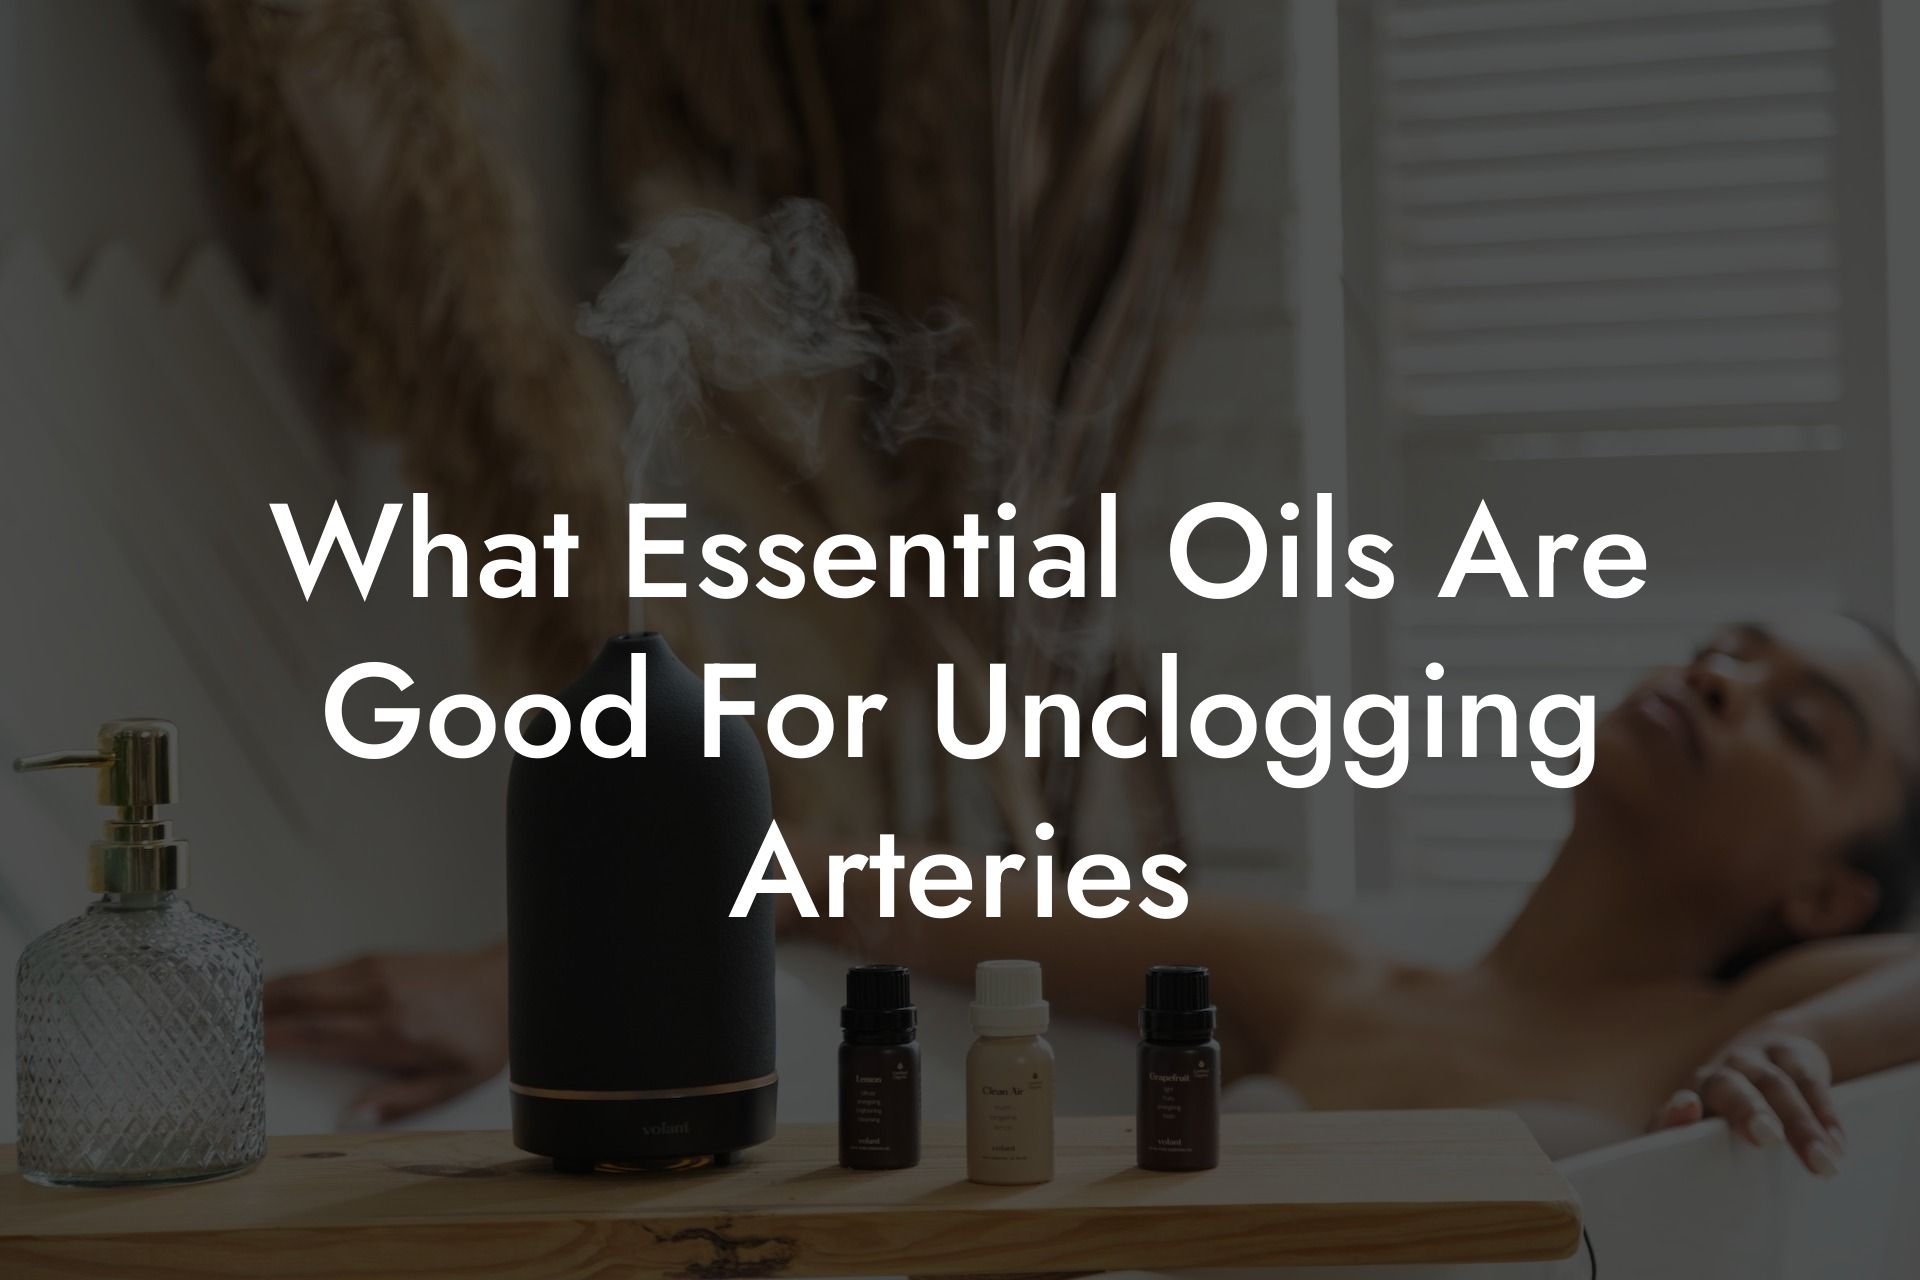 What Essential Oils Are Good For Unclogging Arteries